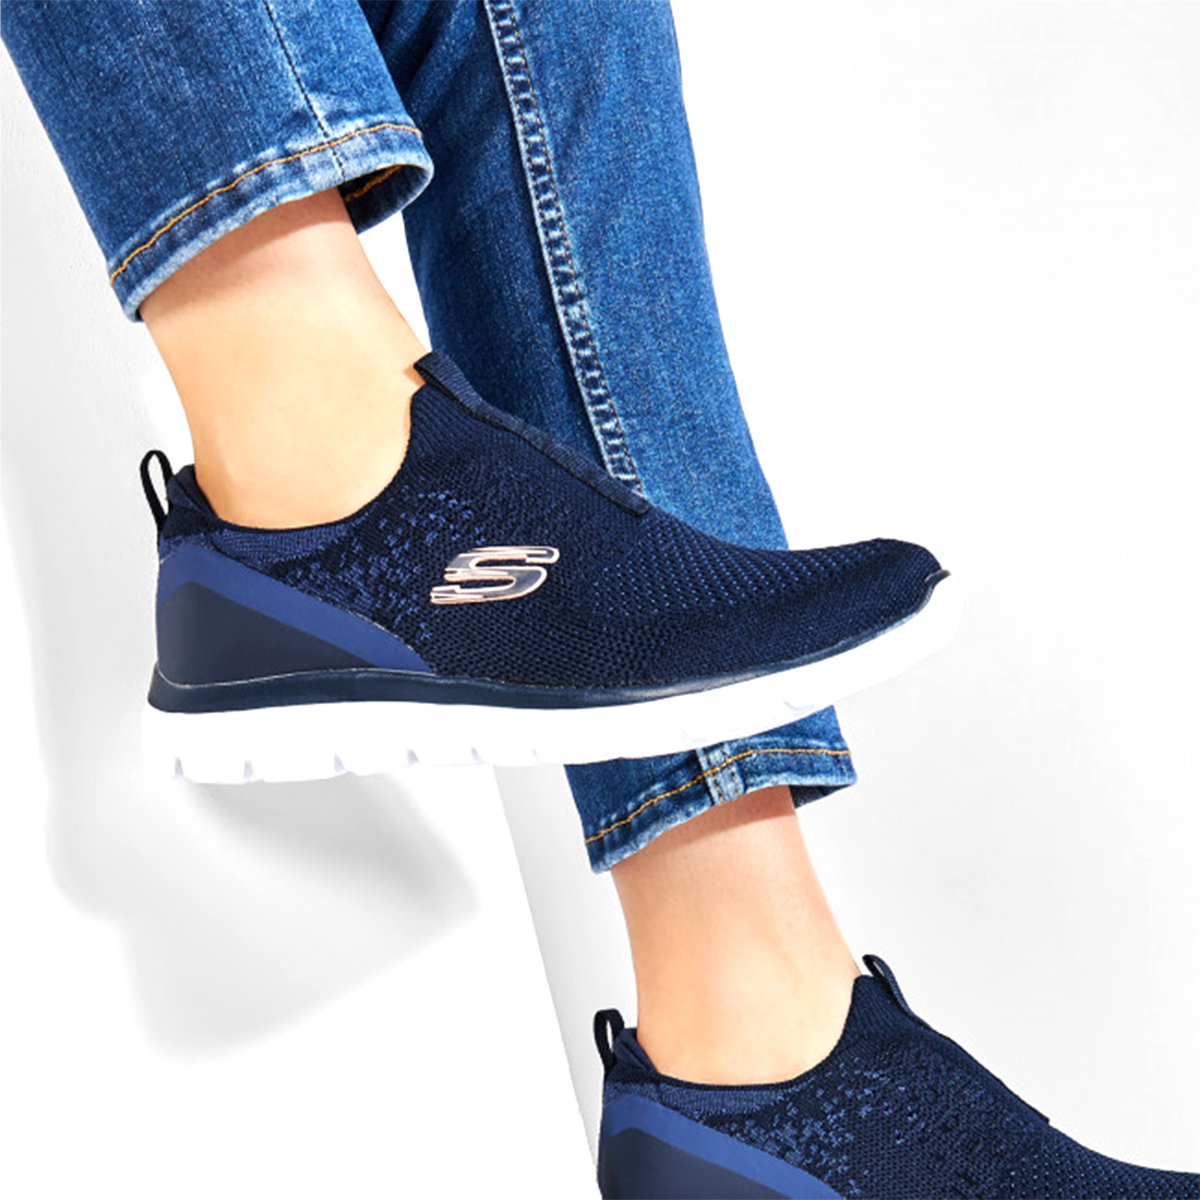 Skechers Summits Daily Flourish Shoes For Women, Navy